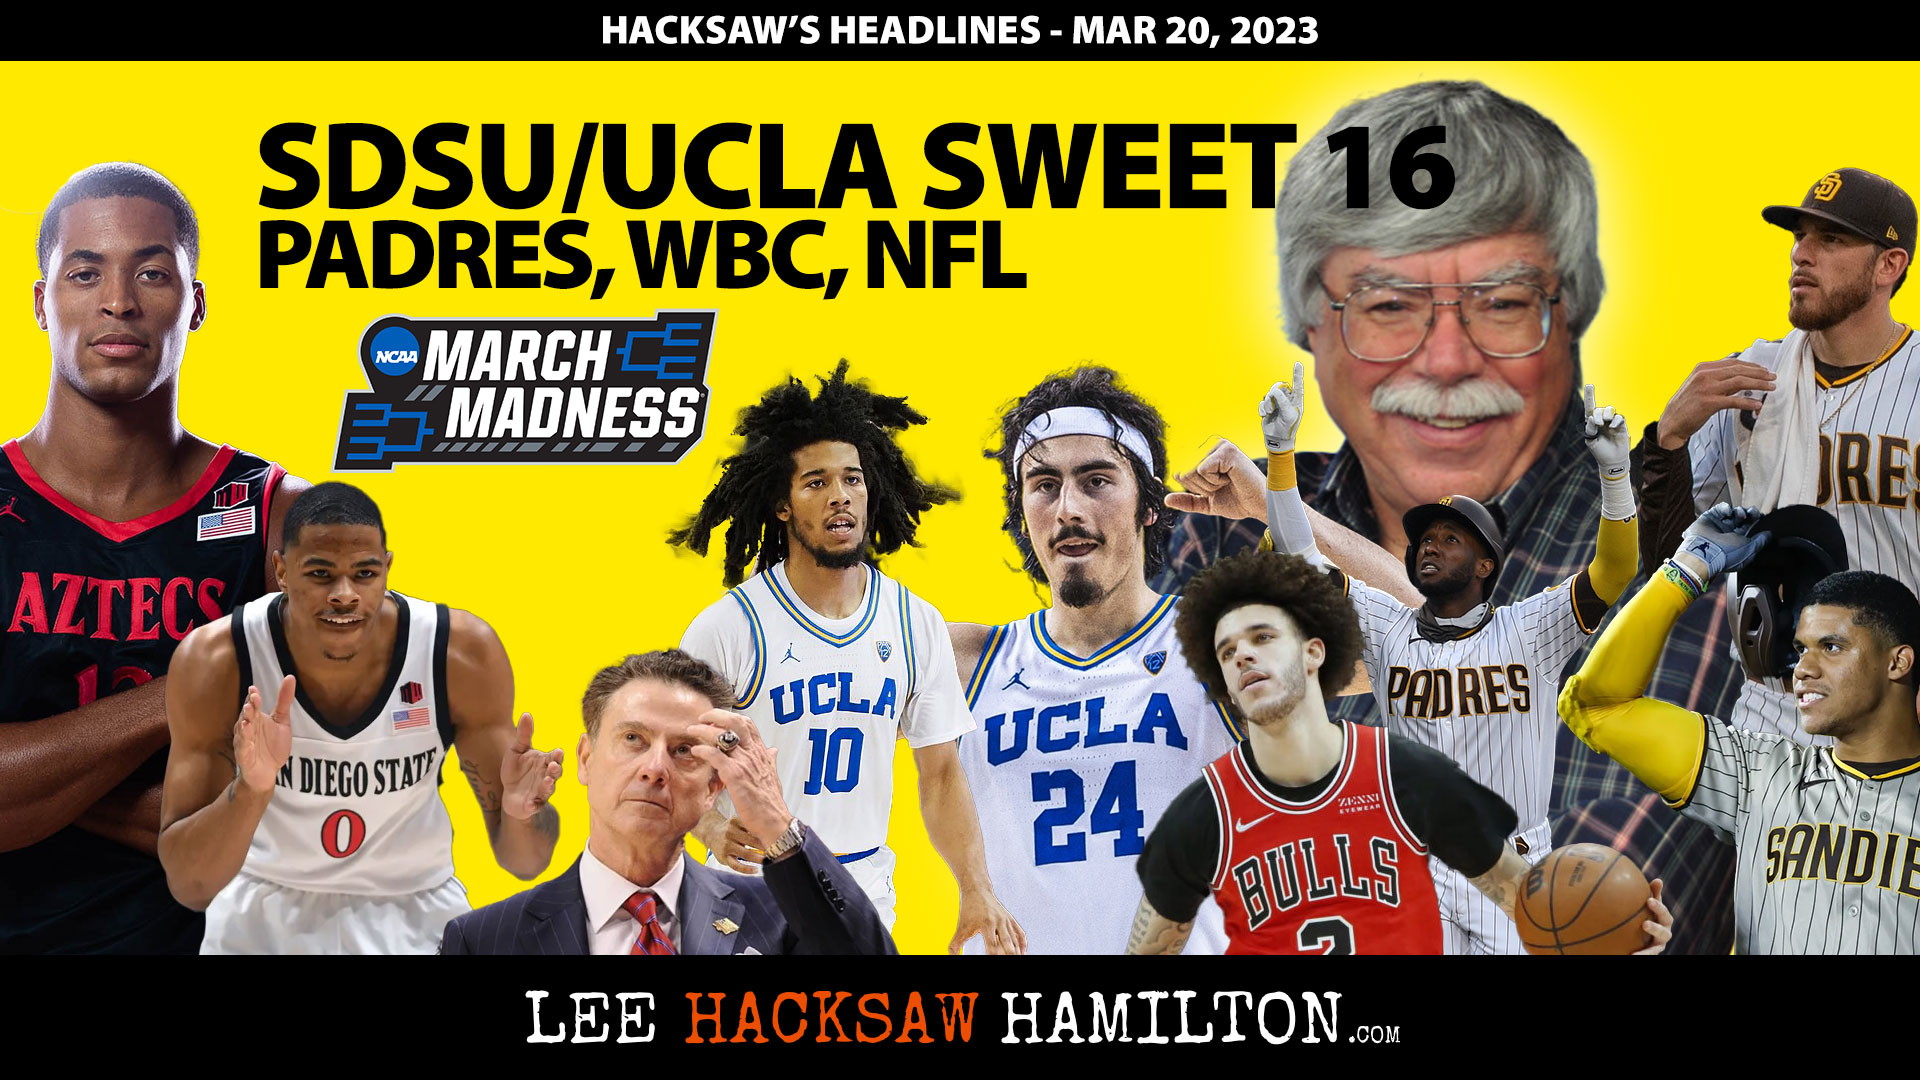 Lee Hacksaw Hamilton discusses San Diego State, UCLA, Sweet 16, March Madness, Padres News, NFL Deals